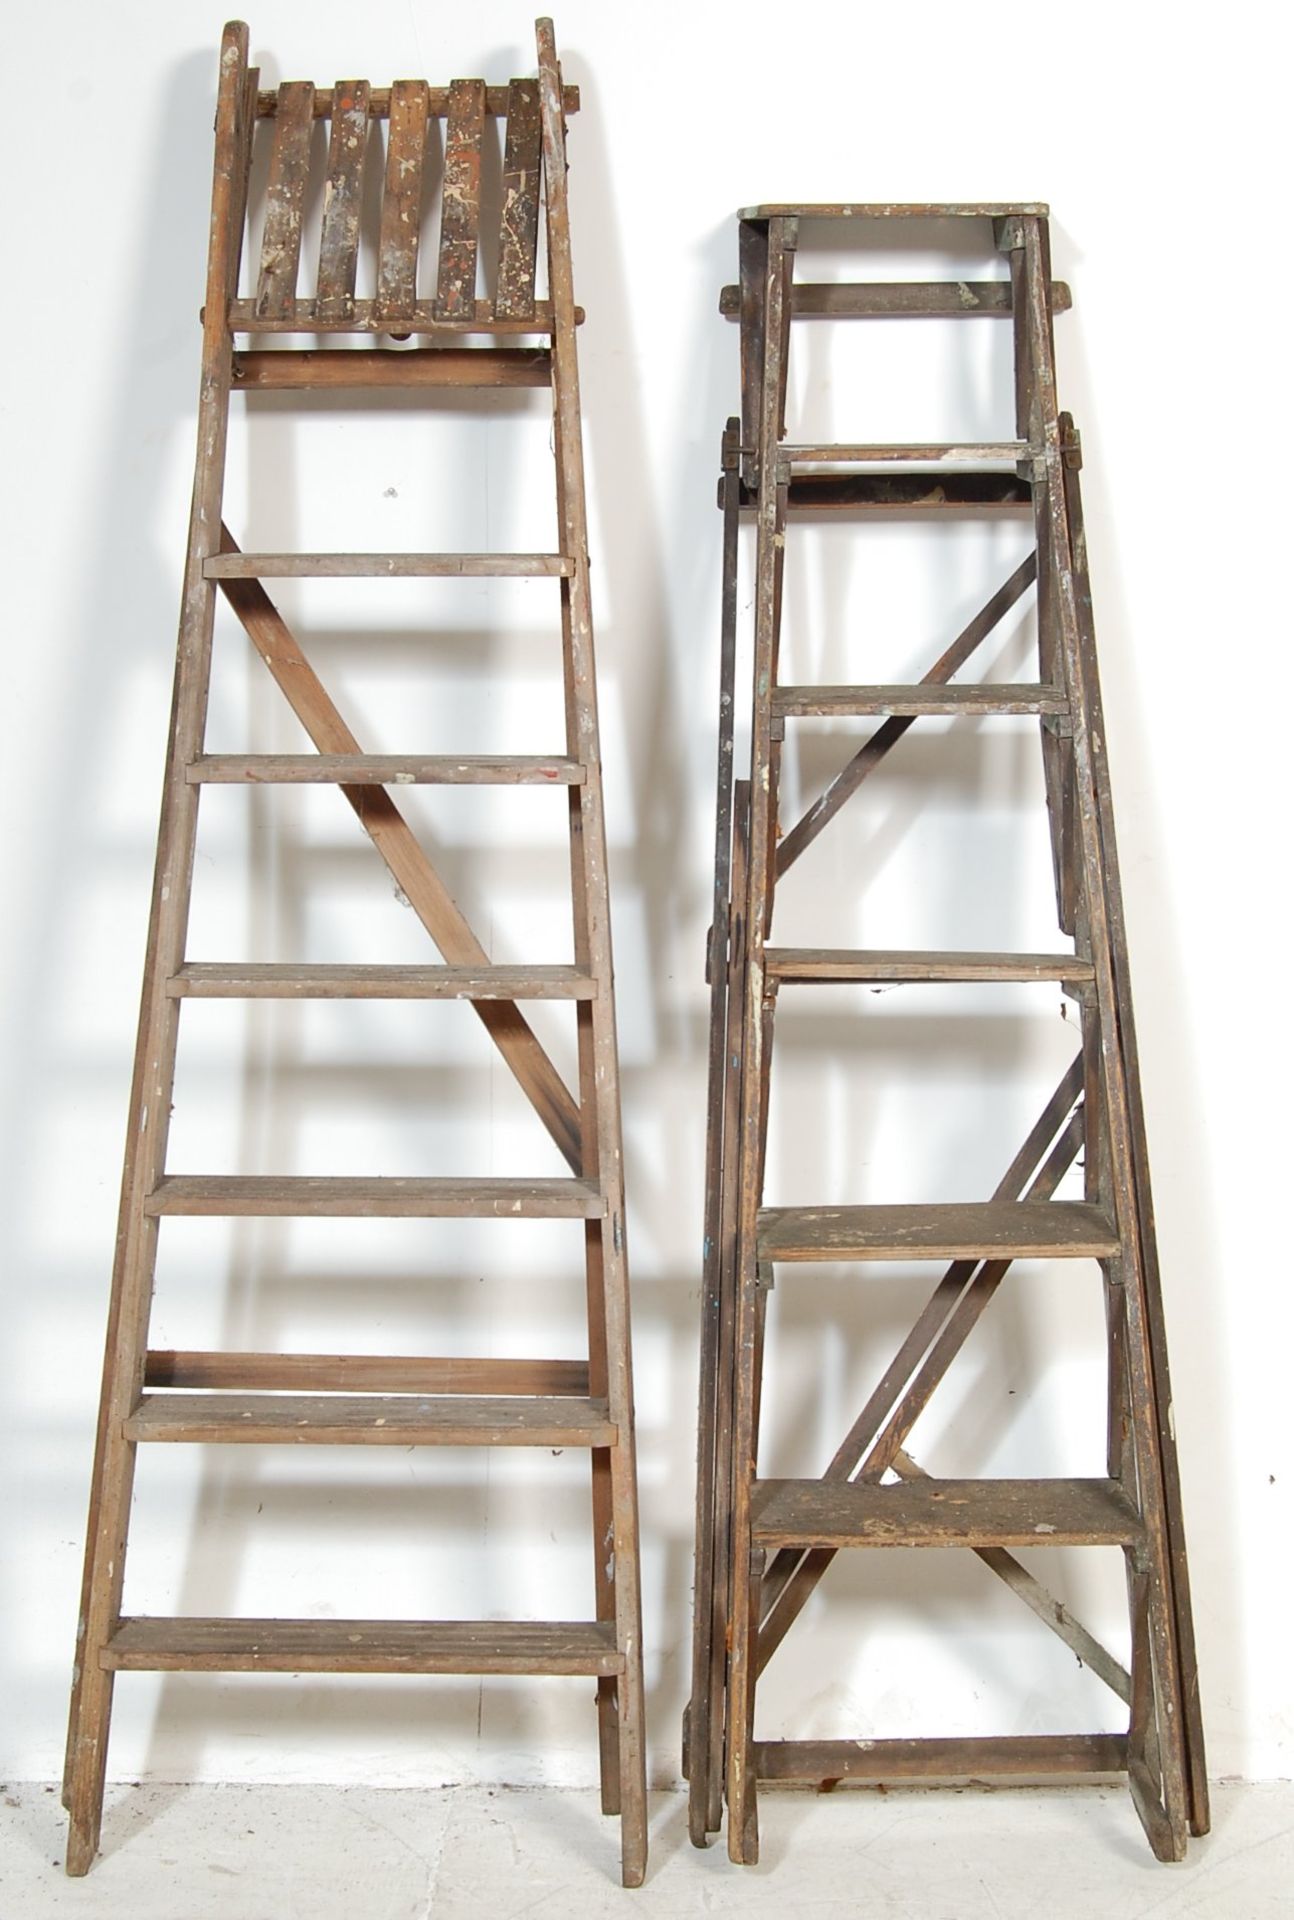 TWO VINTAGE LATE 20TH CENTURY A FRAME WOODEN LADDERS